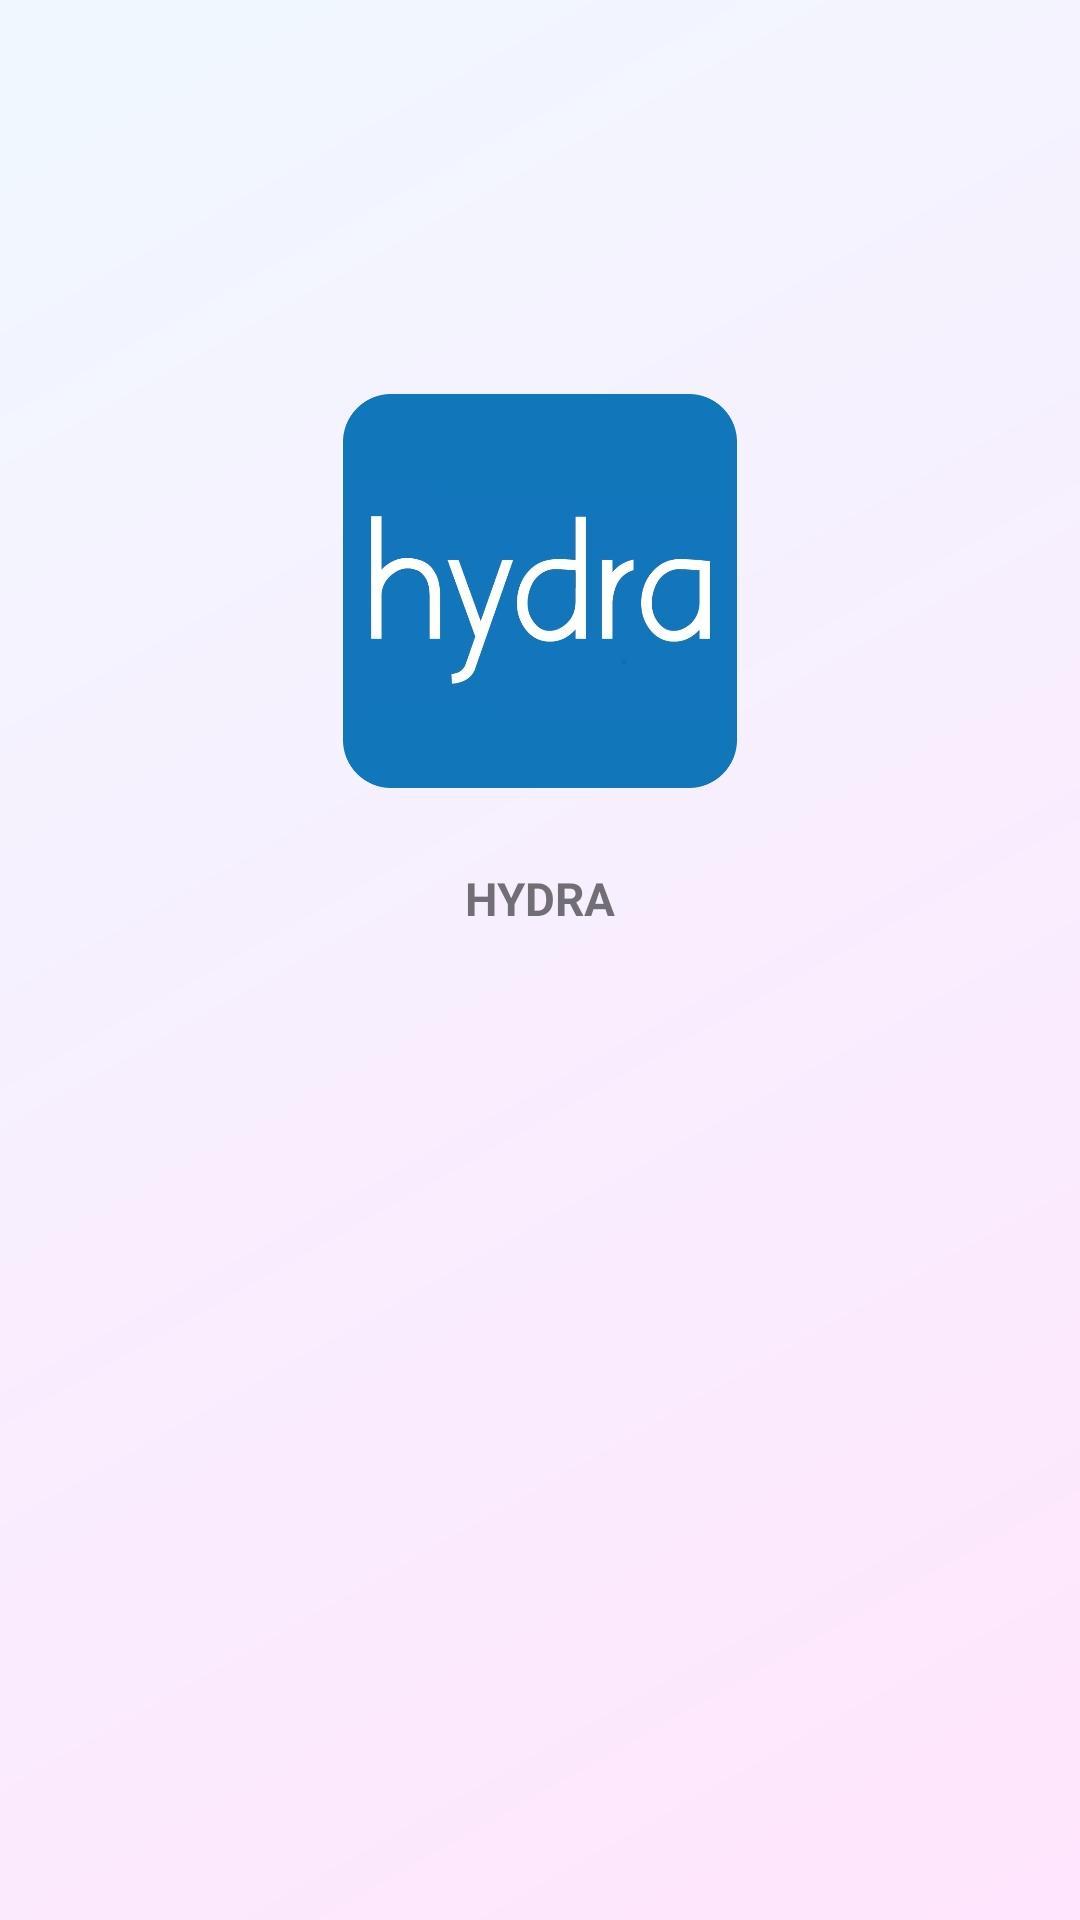 Download android tor browser hydra браузер тор 10 hidra